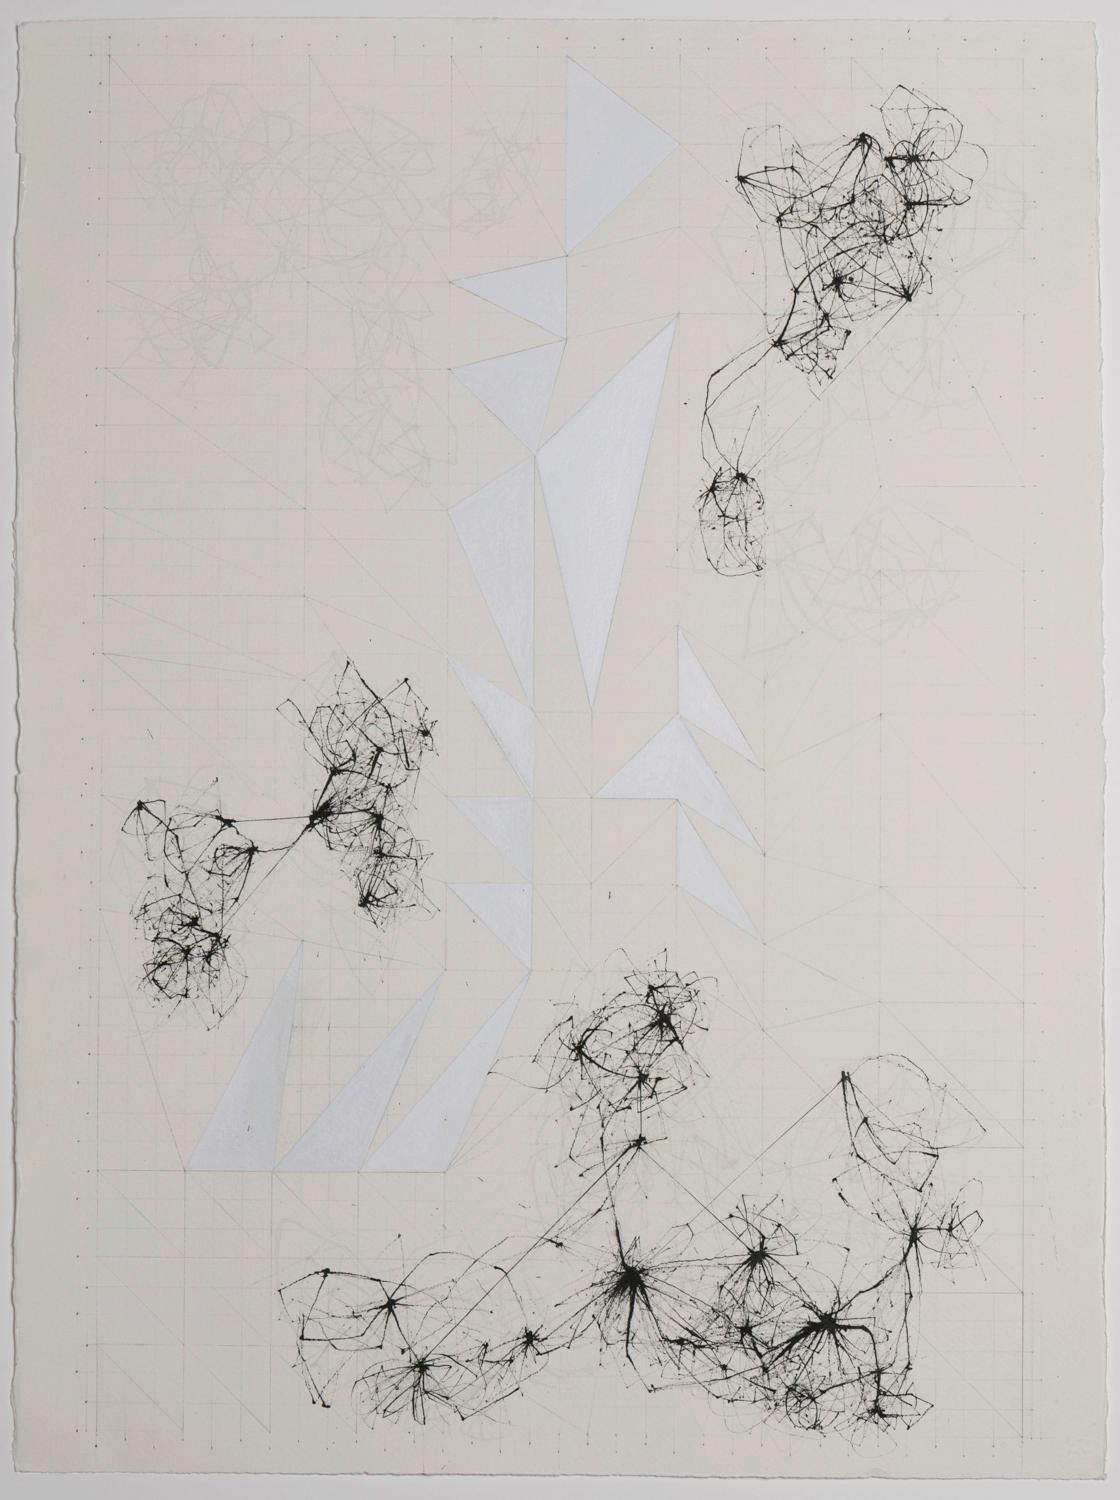 These are three unique drawings, shown in Projects at the London Art Fair in 2017, alongside a giant sculptural installation.  They are framed and glazed.

David attempts to record within his work, amorphous and intangible ‘space’, drawing parallels